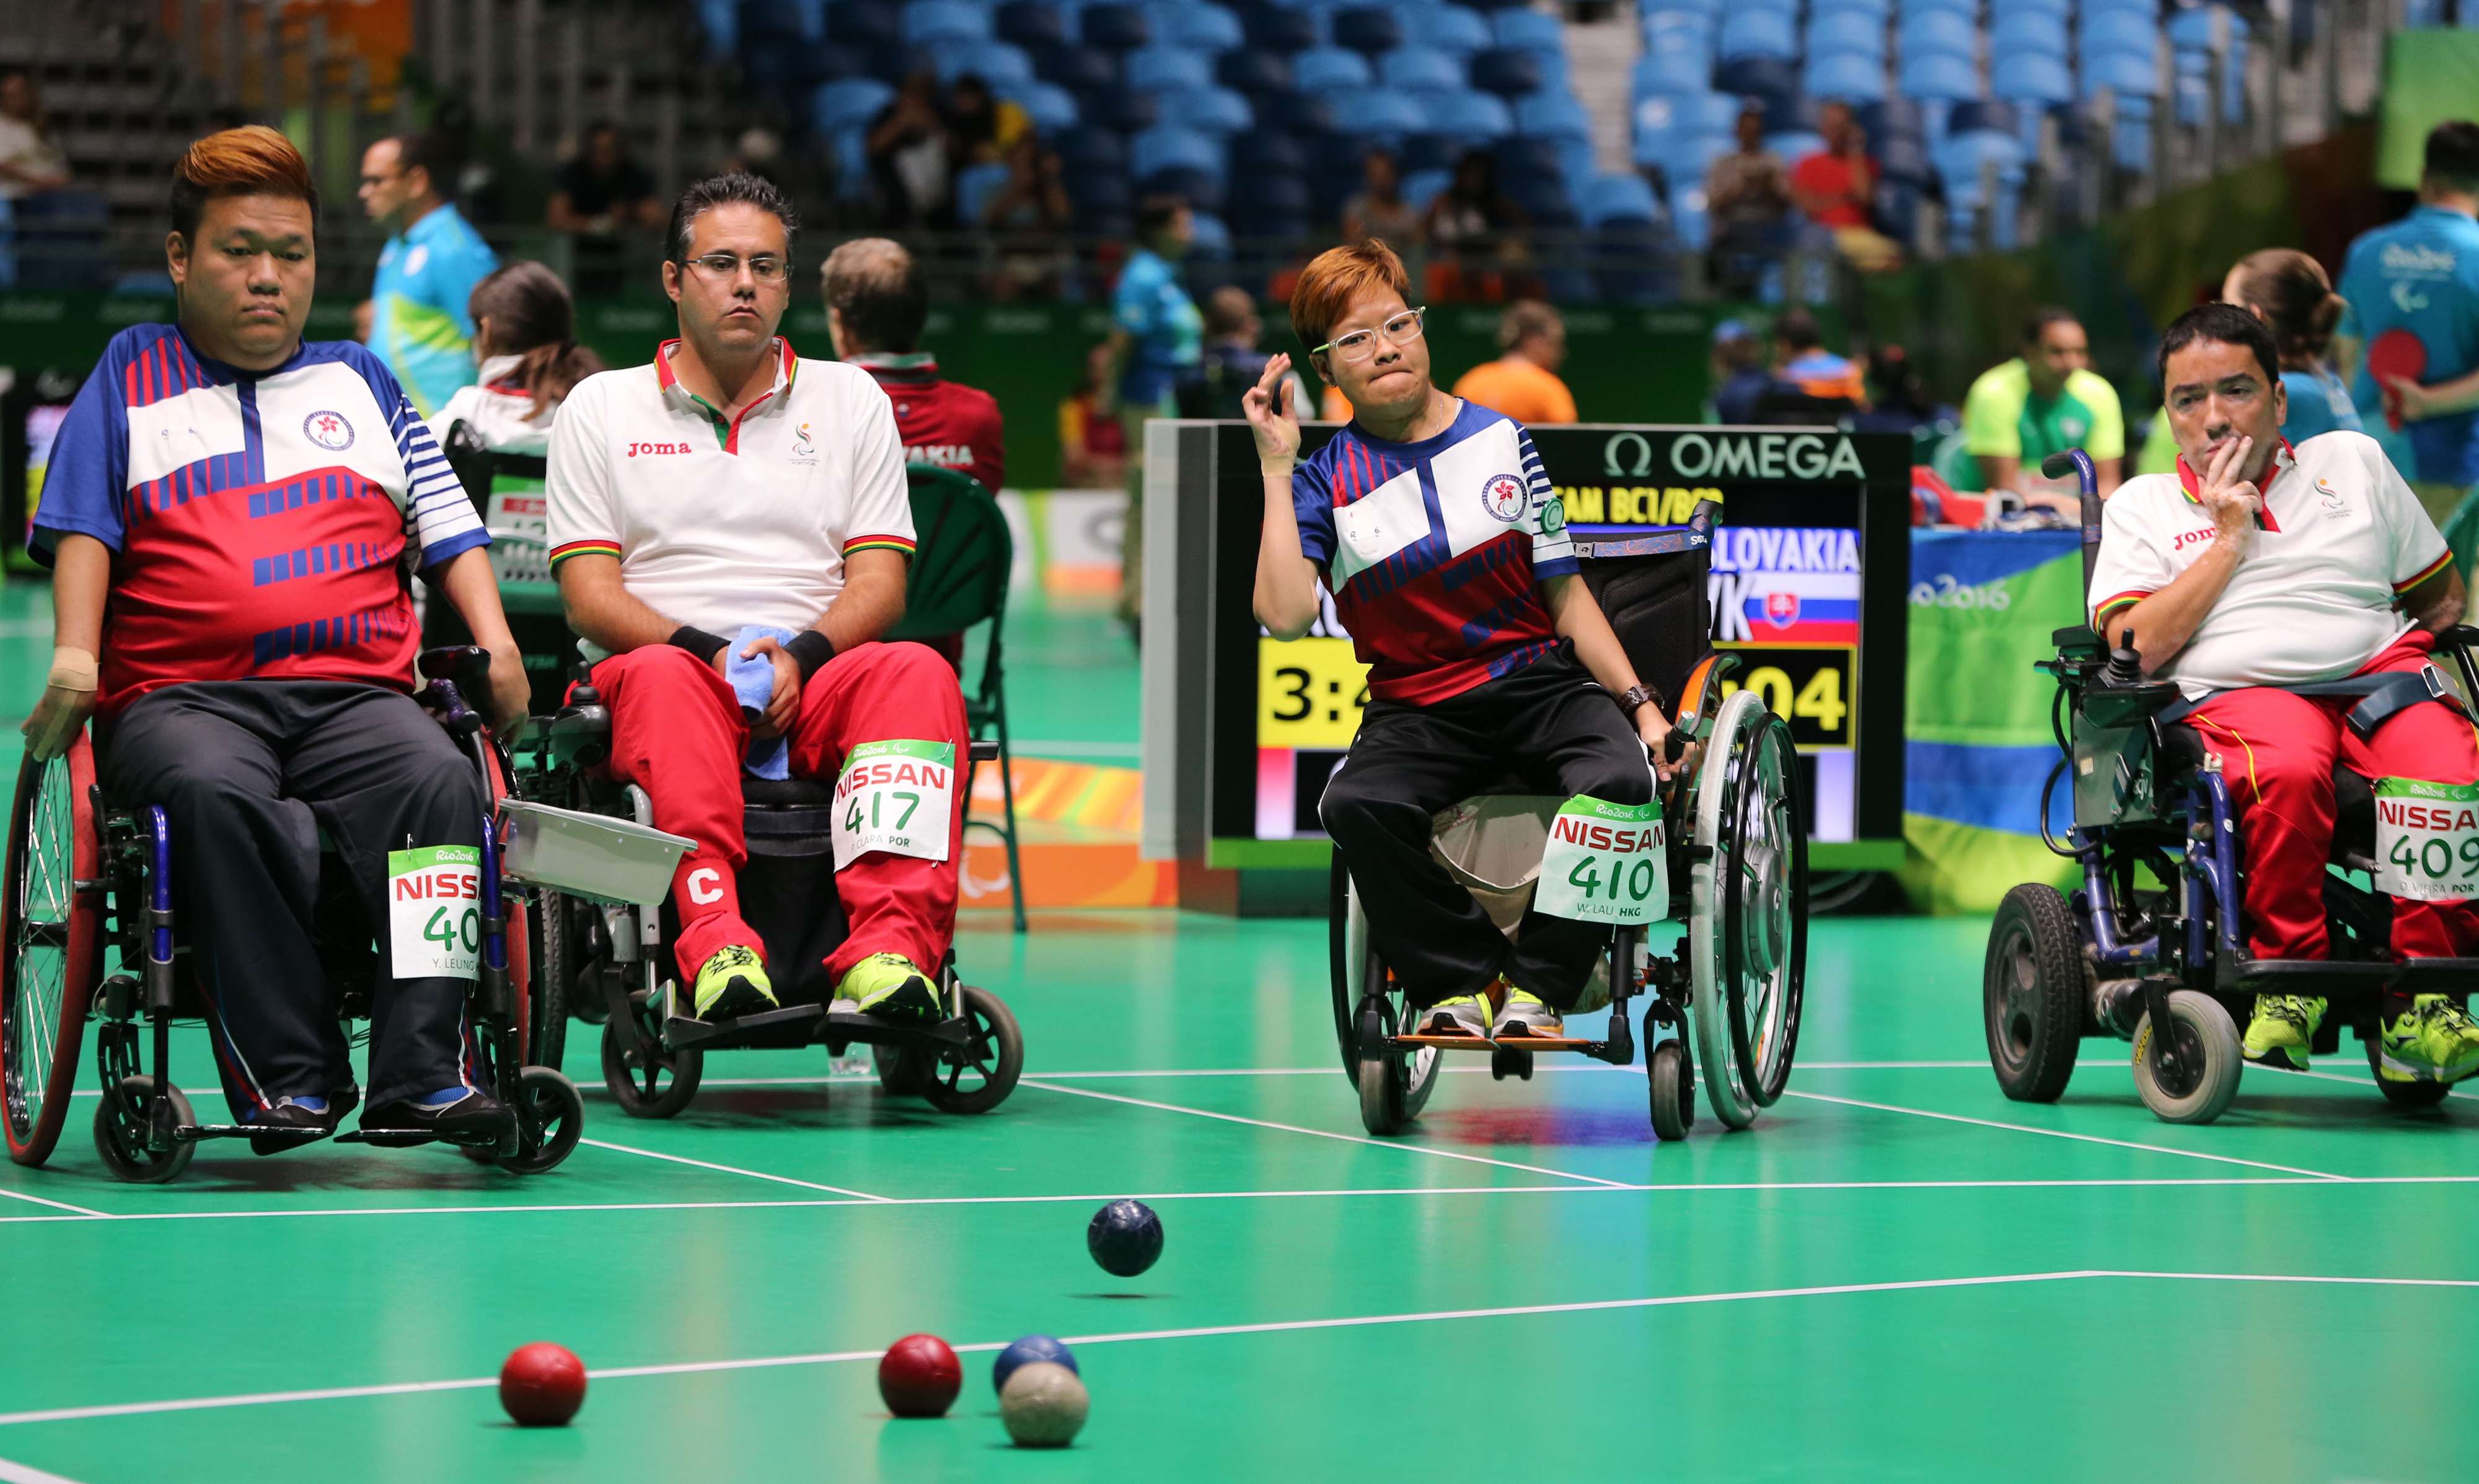 Leung Yuk-wing (left) and Lau Wai-yan in the boccia mixed pairs event. Photo: Hong Kong Paralympic Committee.